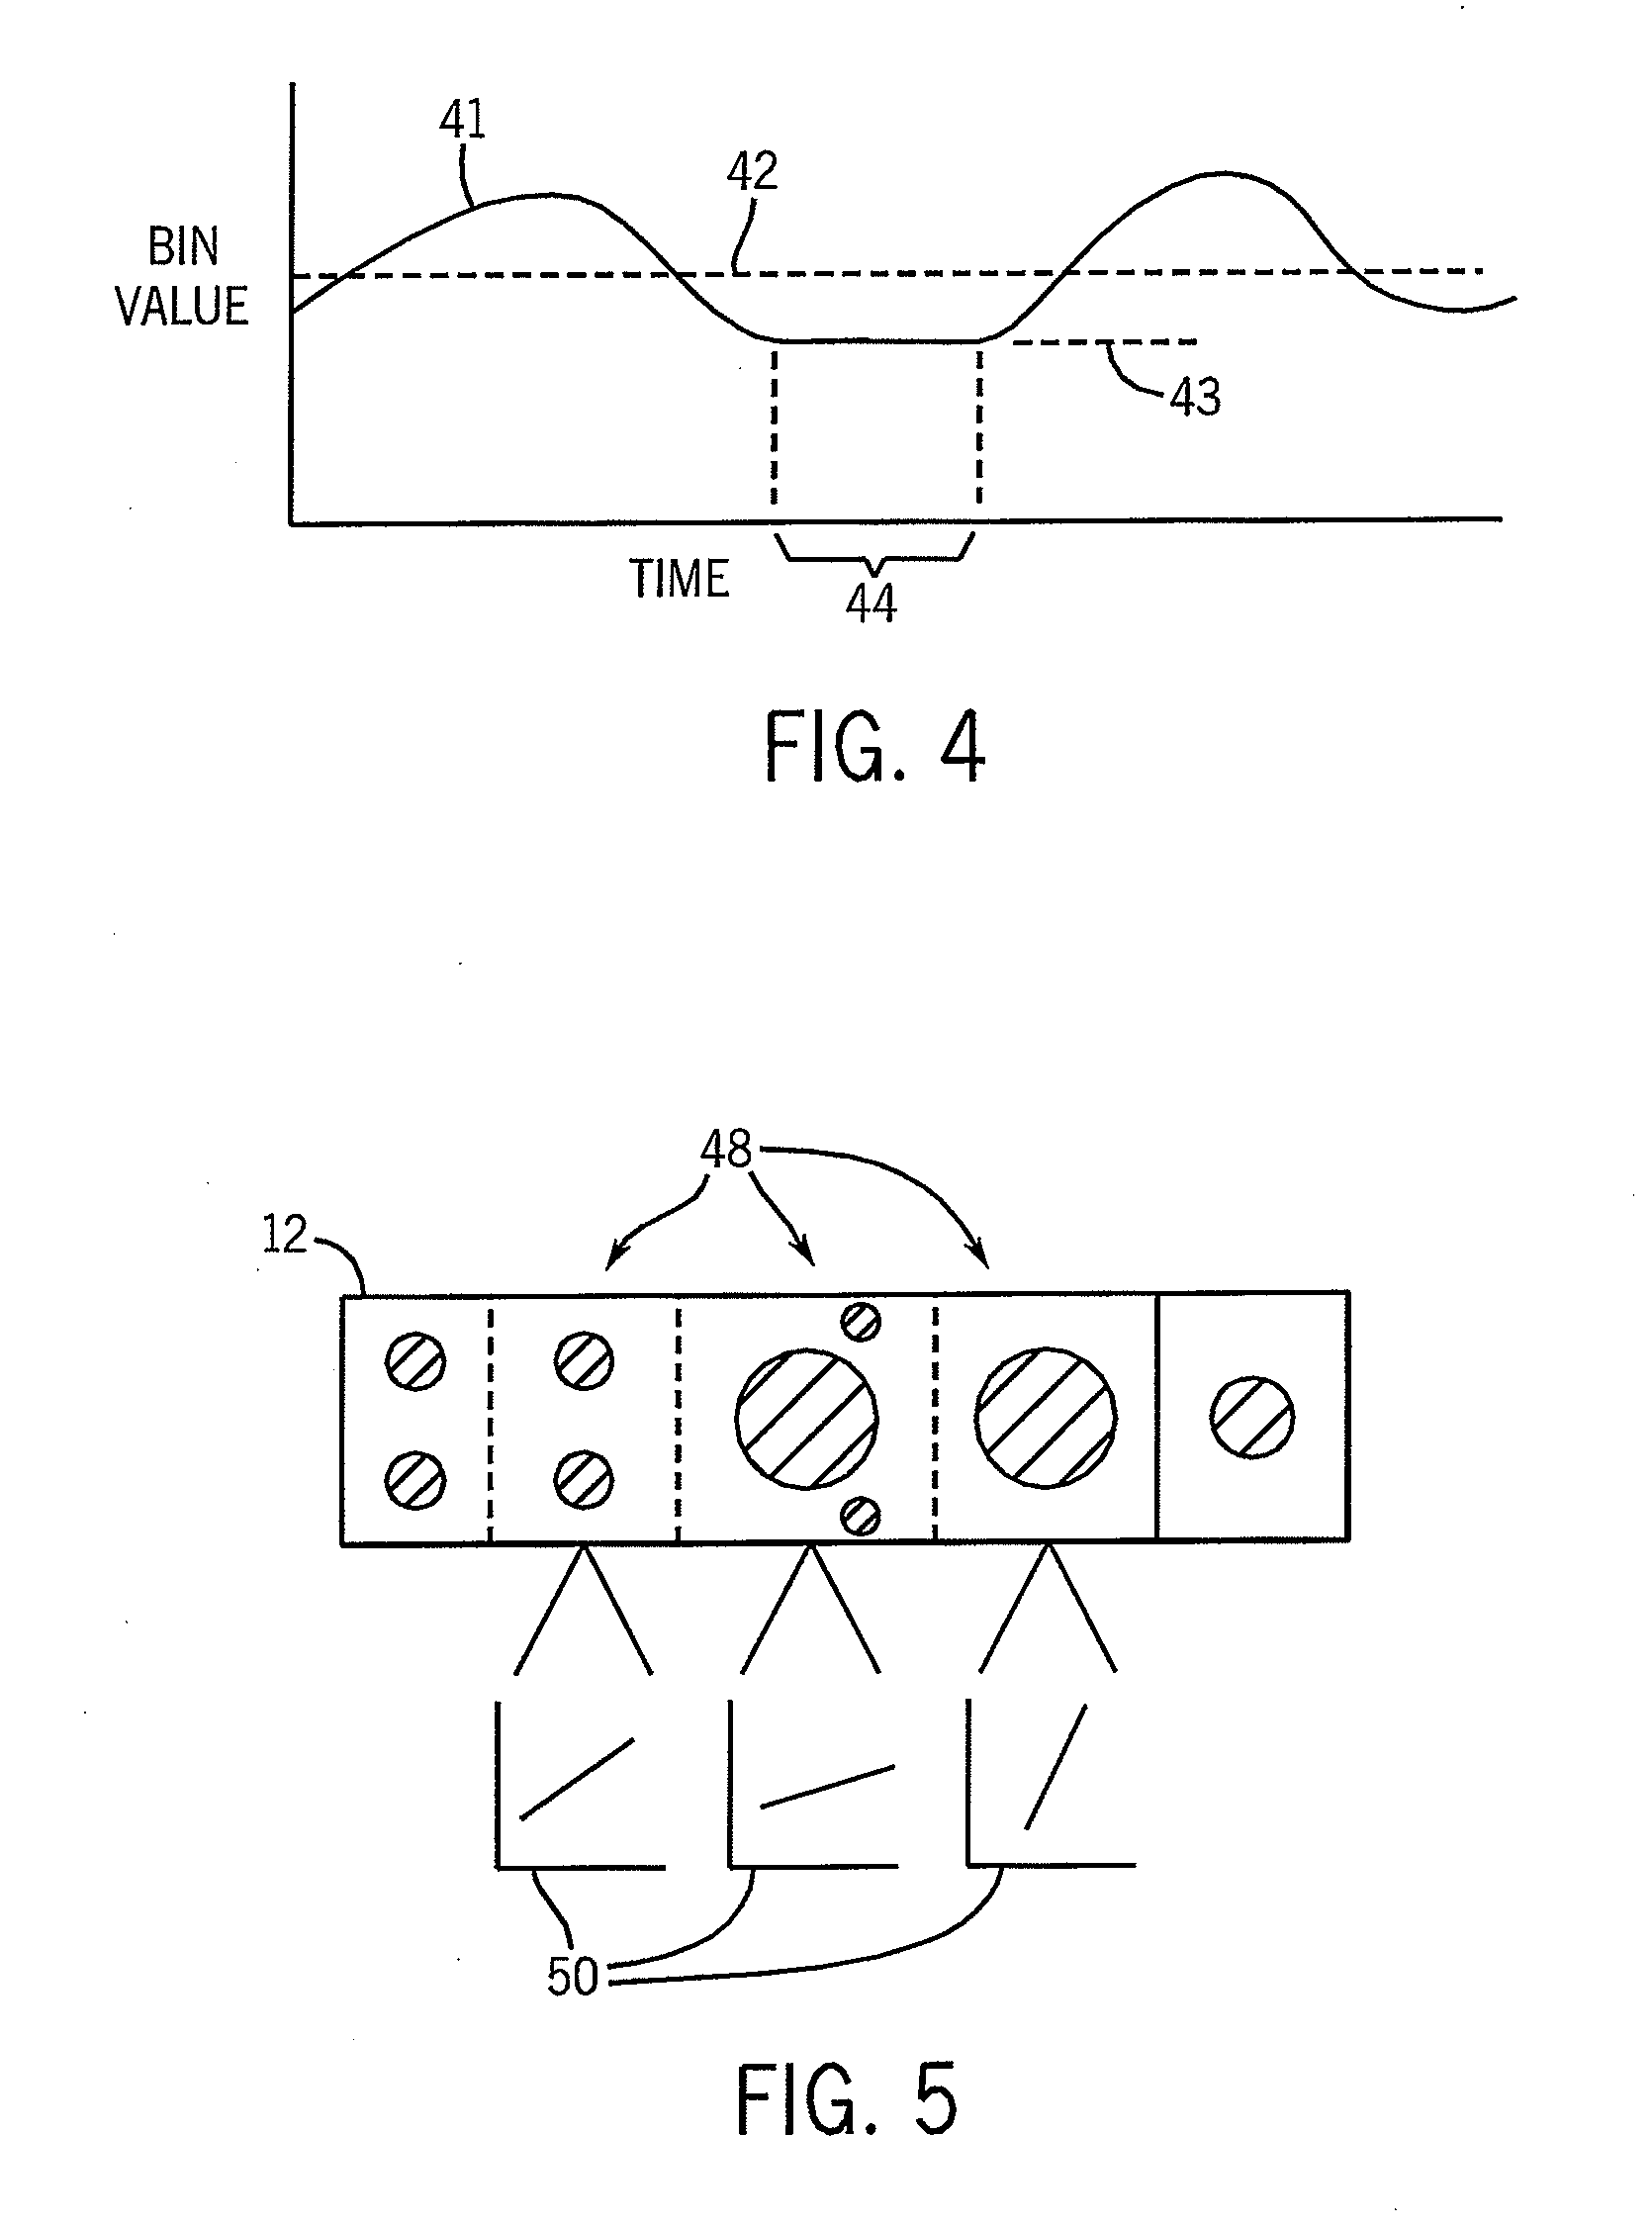 Apparatus for measurement of body composition